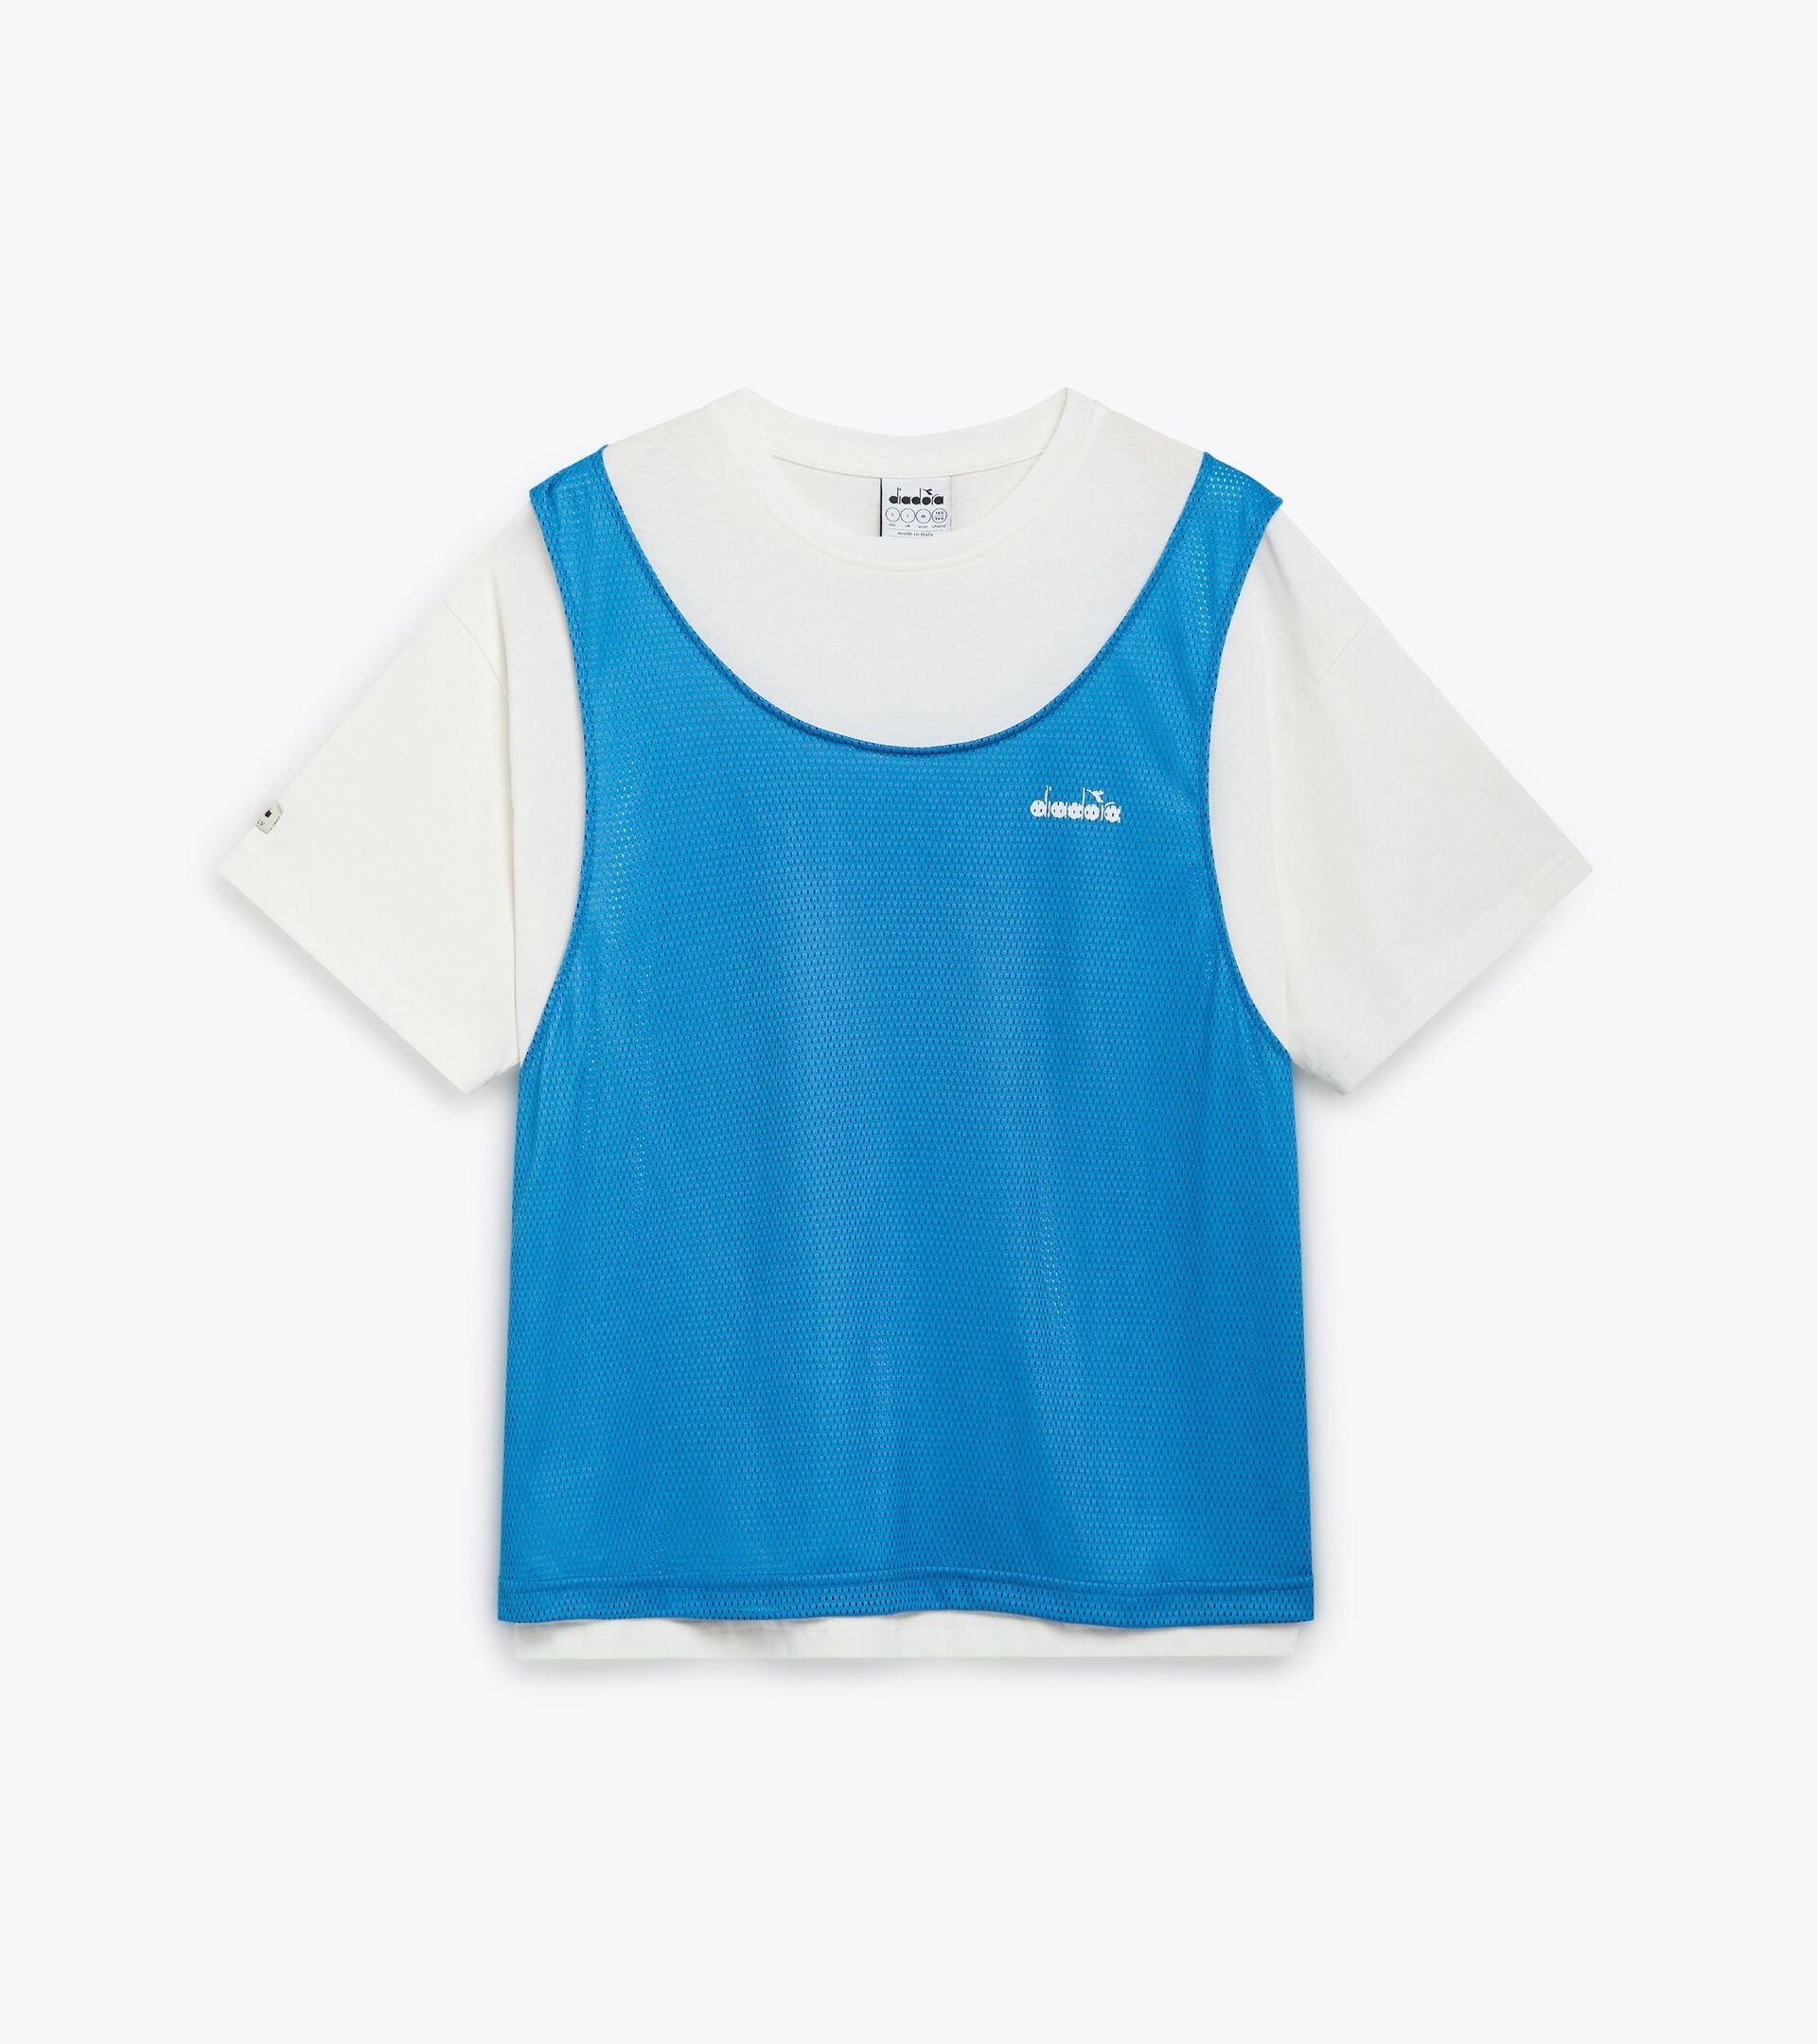 T-shirt e canotta 2 in 1 - Made in Italy - Gender Neutral
 T-SHIRT SS 2-IN-1 LEGACY AZZURRO COSTA PACIFICO - Diadora